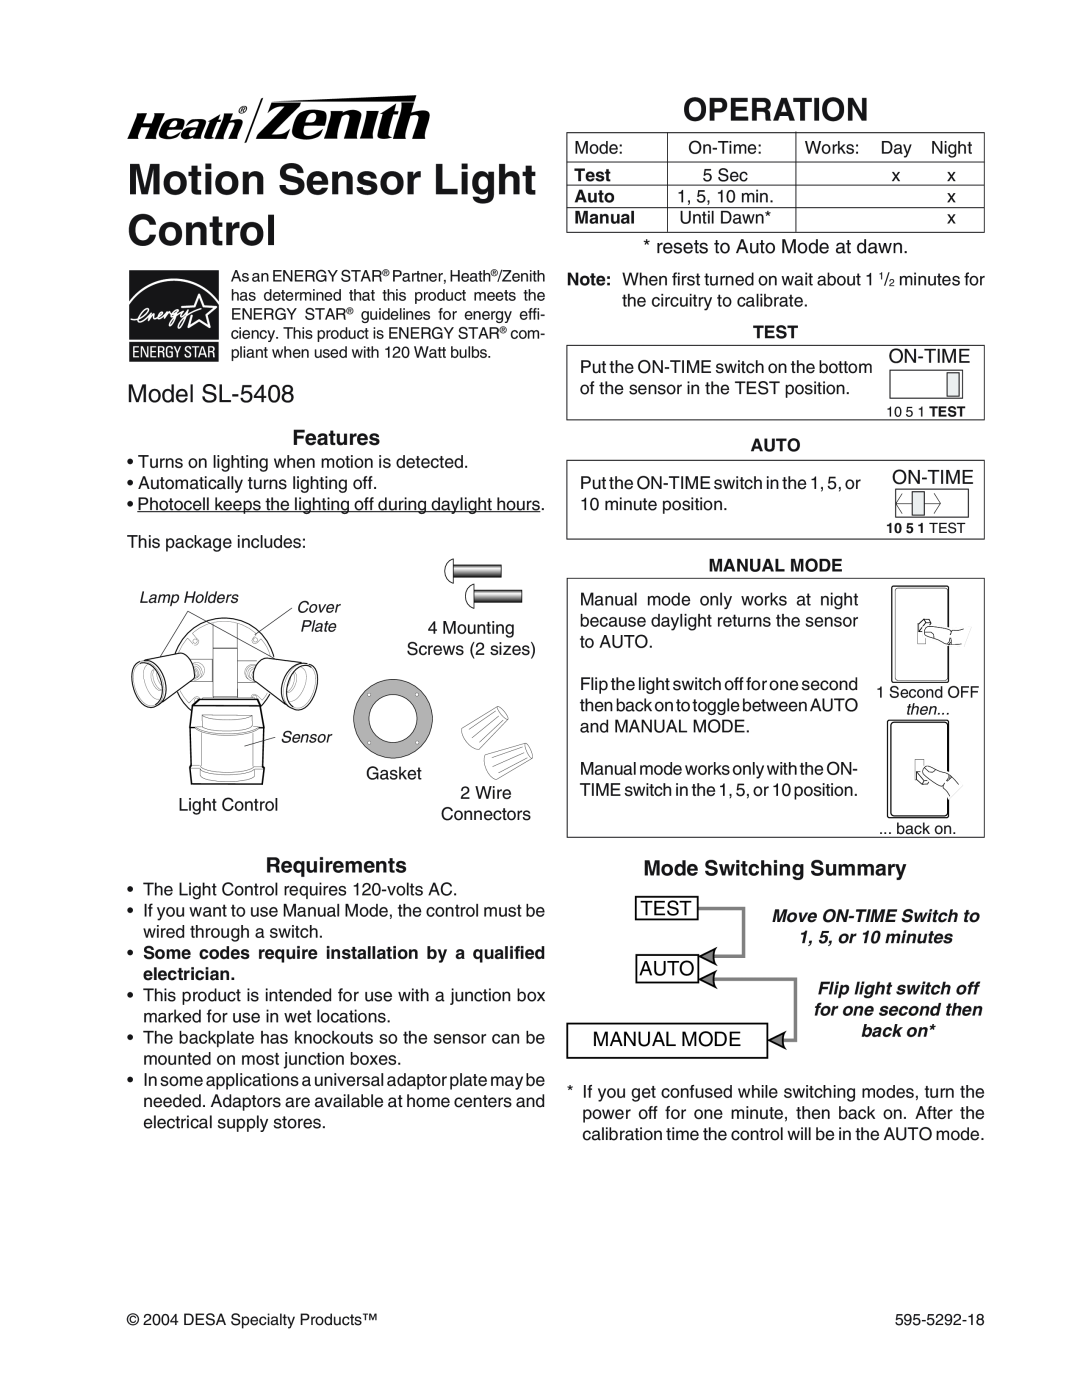 Heath Zenith SL-5408-WH manual Motion Sensor Light Control, Operation, Model SL-5408, Features, Requirements, On-Time 